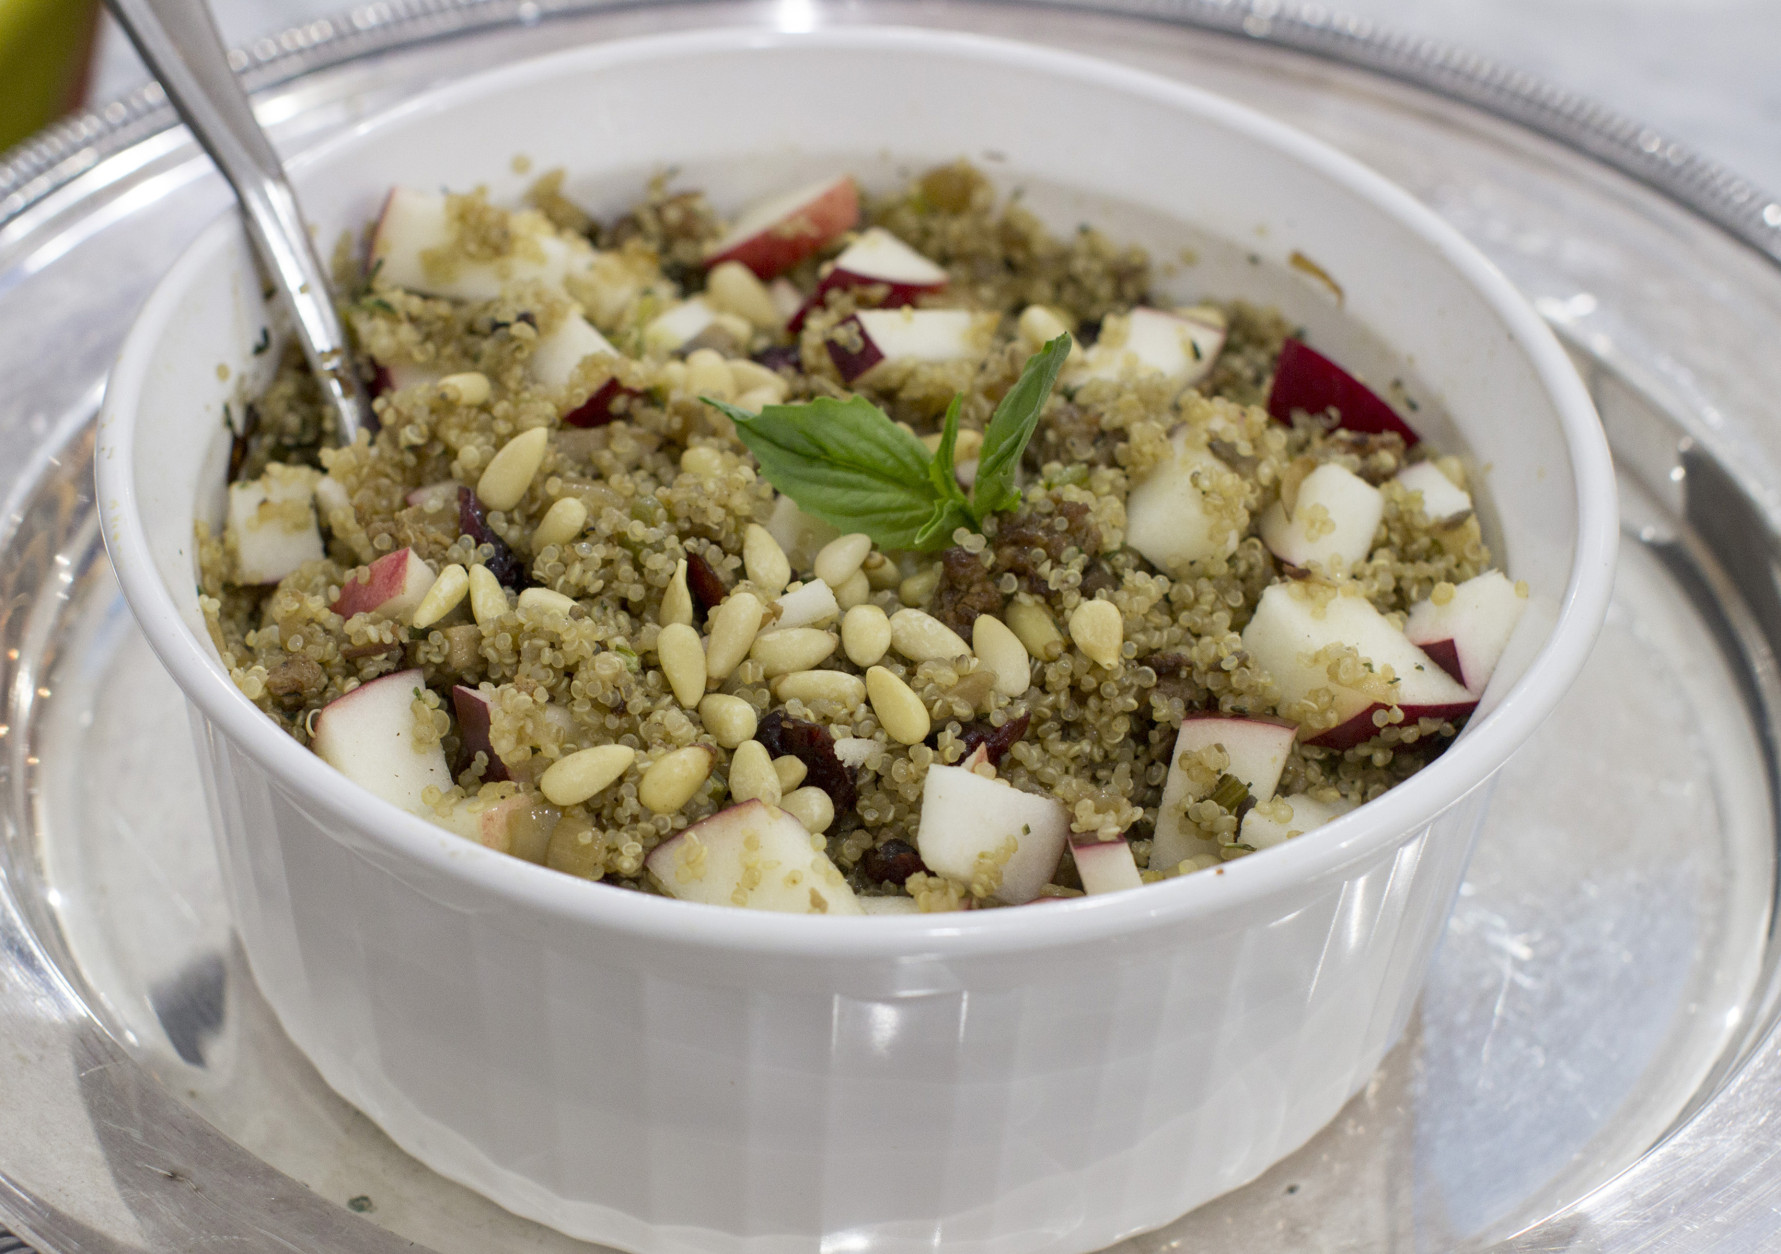 This Dec. 1, 2014, photo shows winter quinoa dressing with apples and dried cranberries in Concord, N.H. (AP Photo/Matthew Mead)